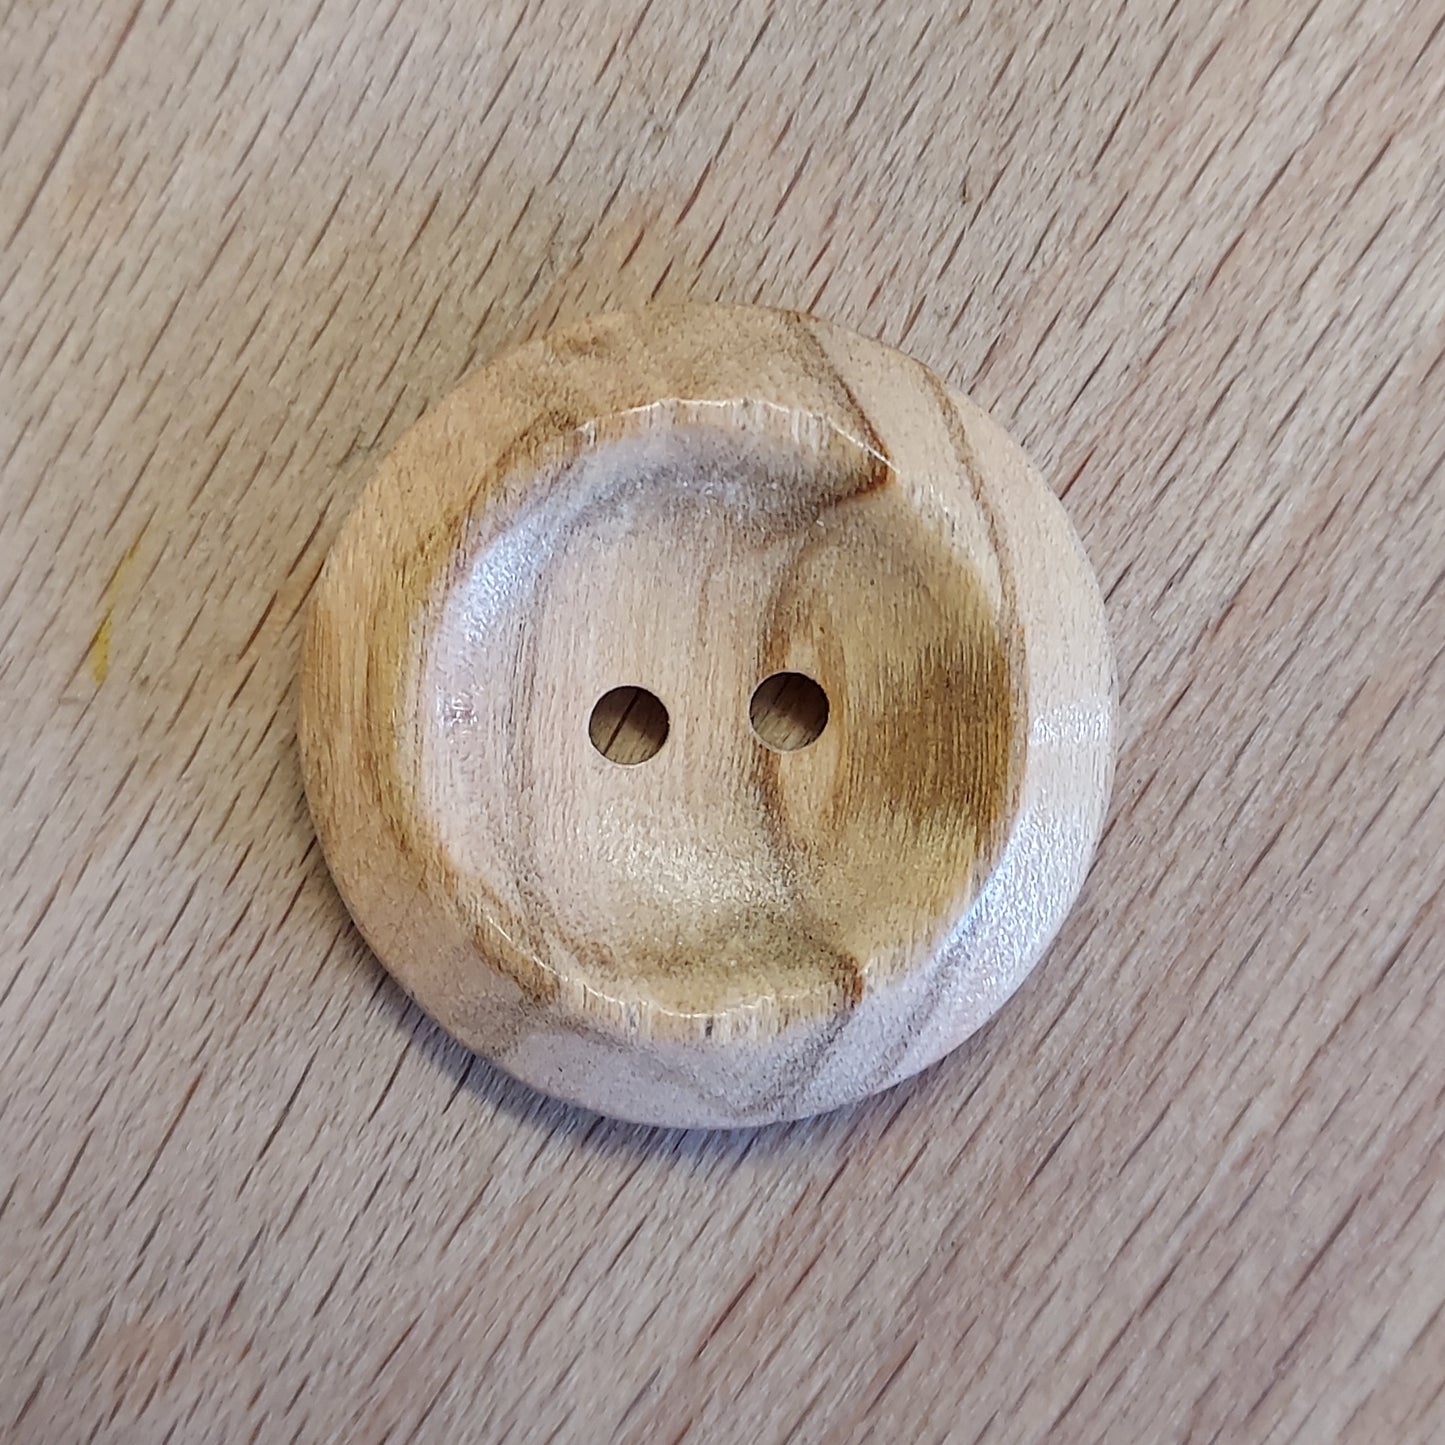 Wooden Grain Button with Two Holes - Various Sizes